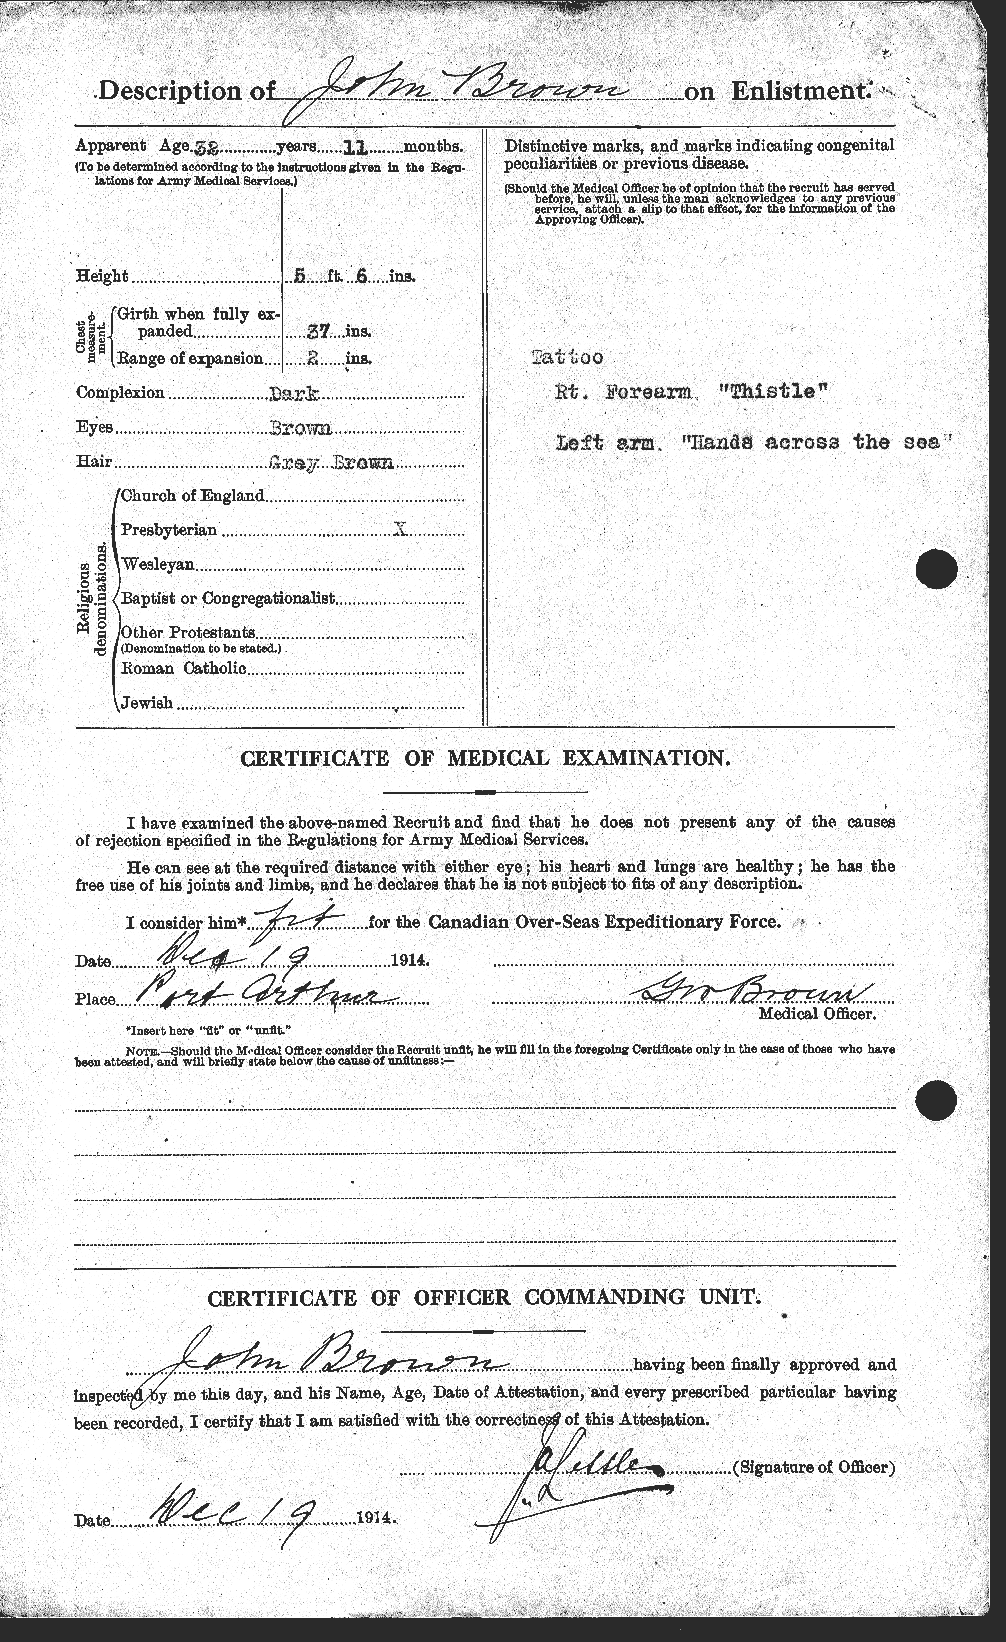 Personnel Records of the First World War - CEF 264532b